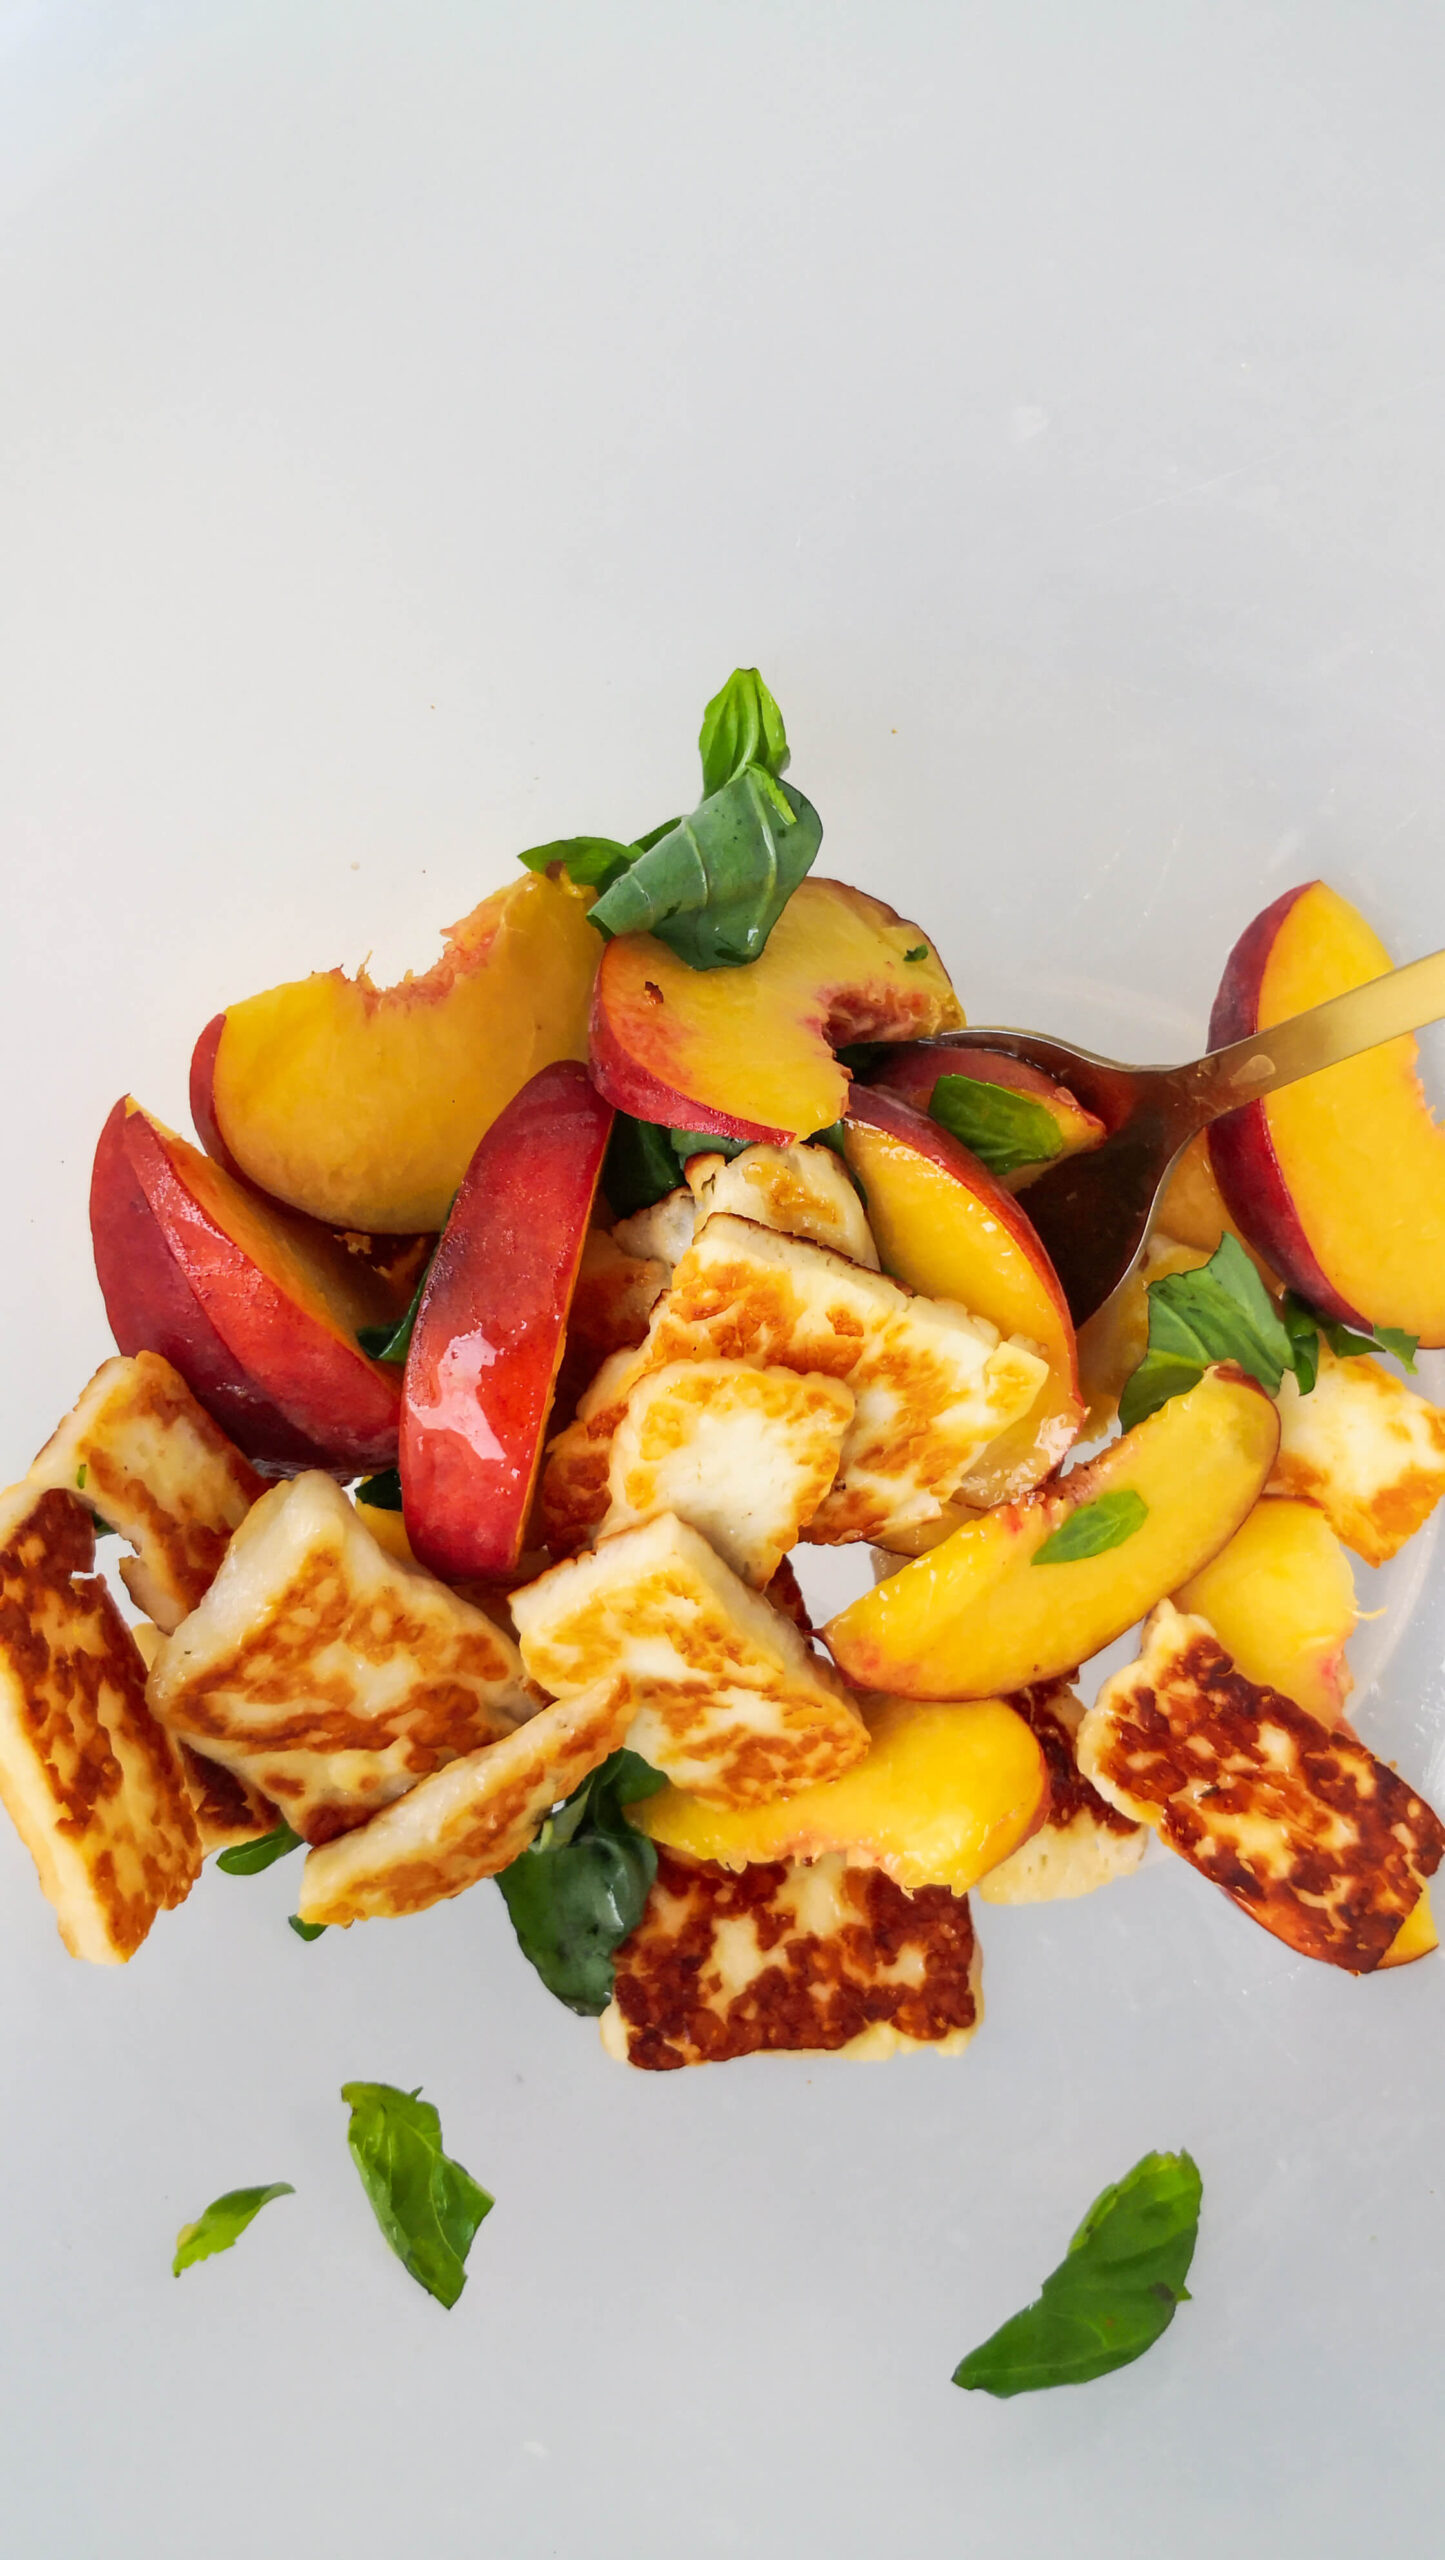 Peach and halloumi salad being mixed in a large clear bowl.